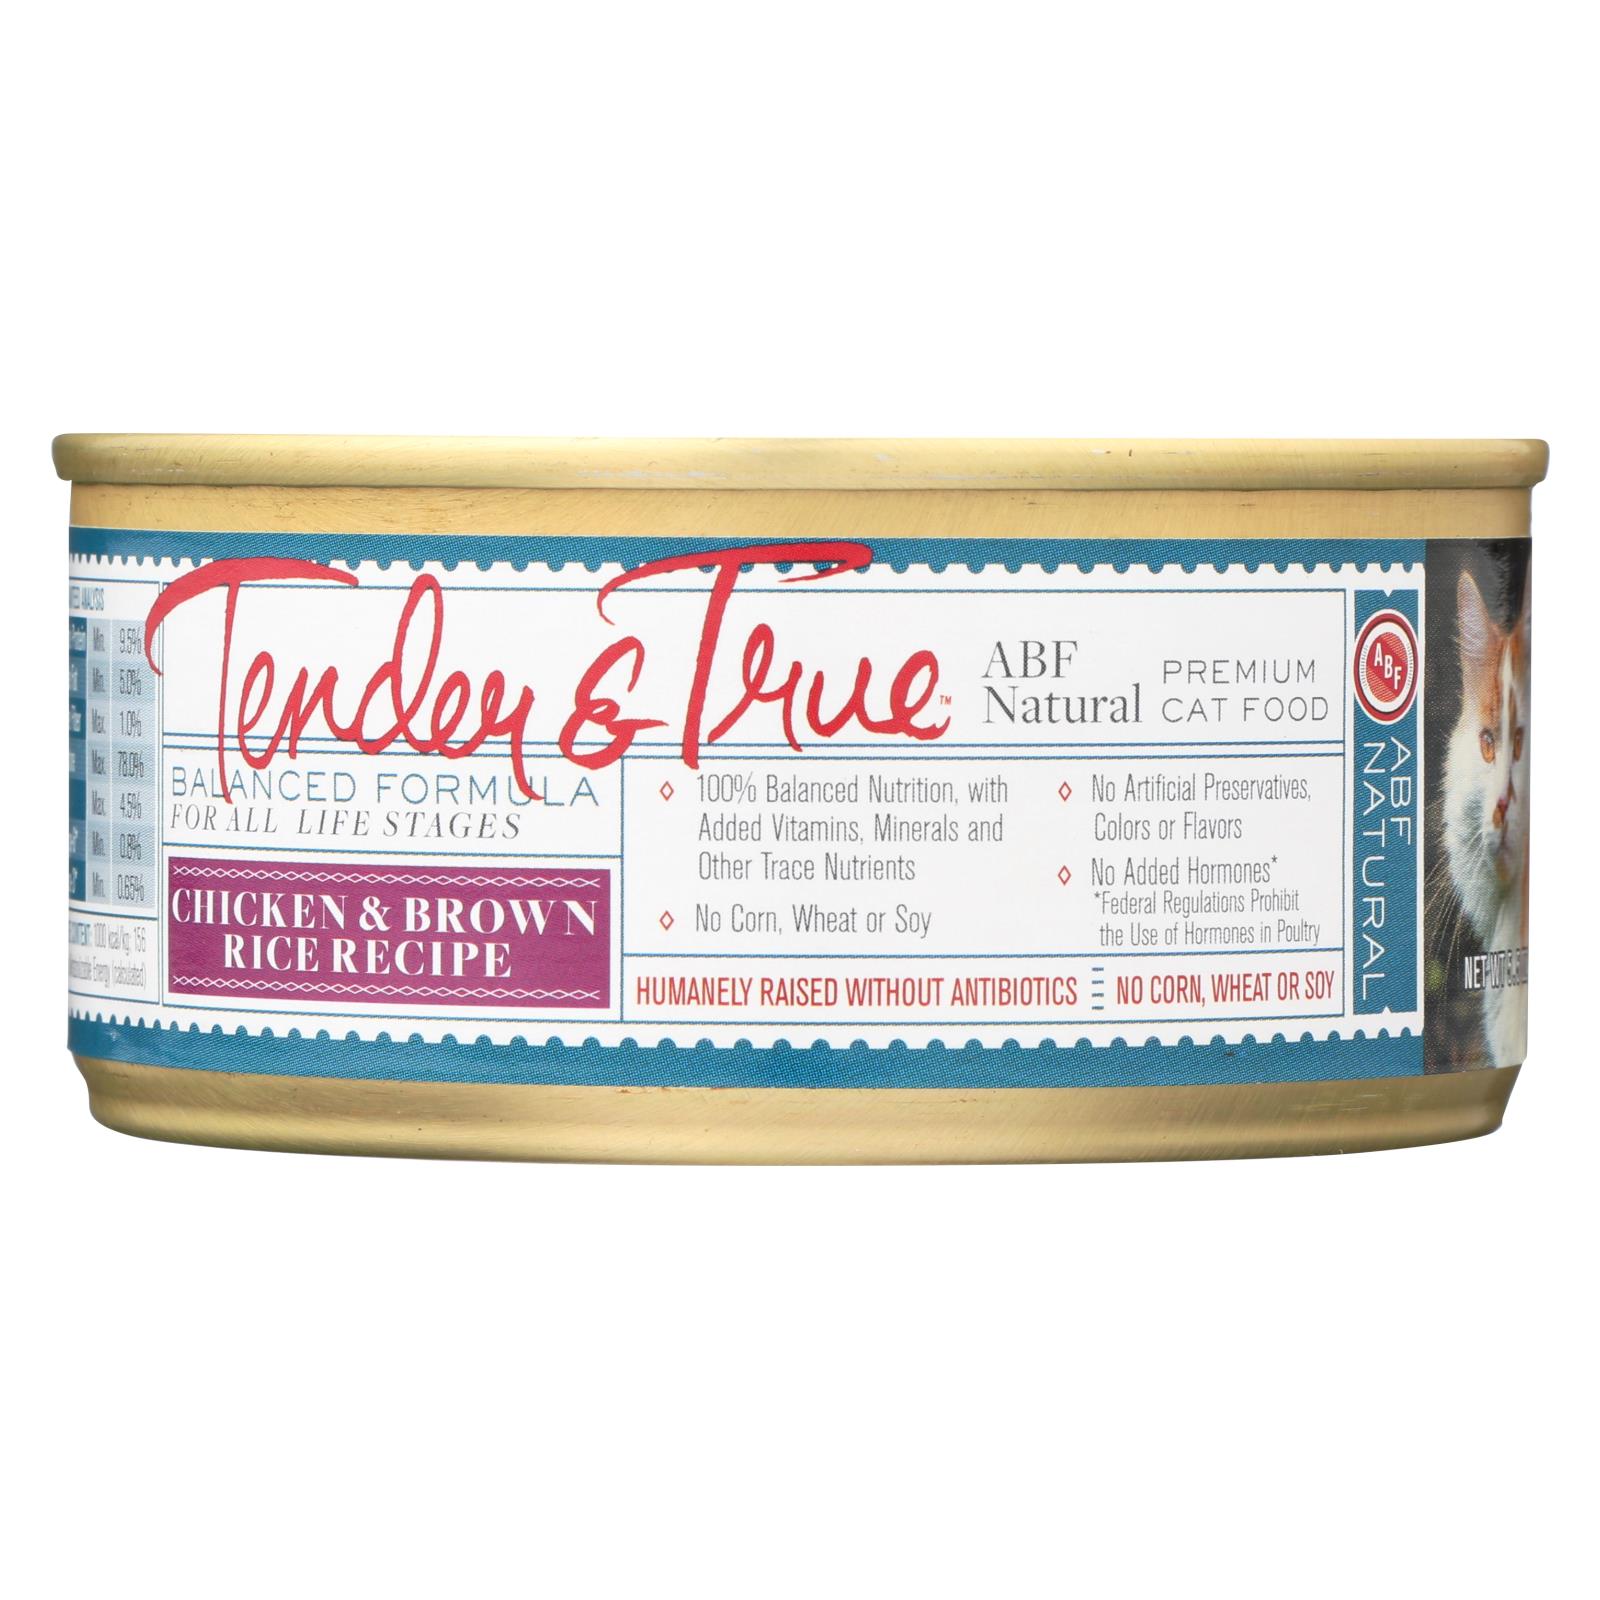 Tender & True Cat Food Chicken And Brown Rice - 24개 묶음상품 - 5.5 OZ